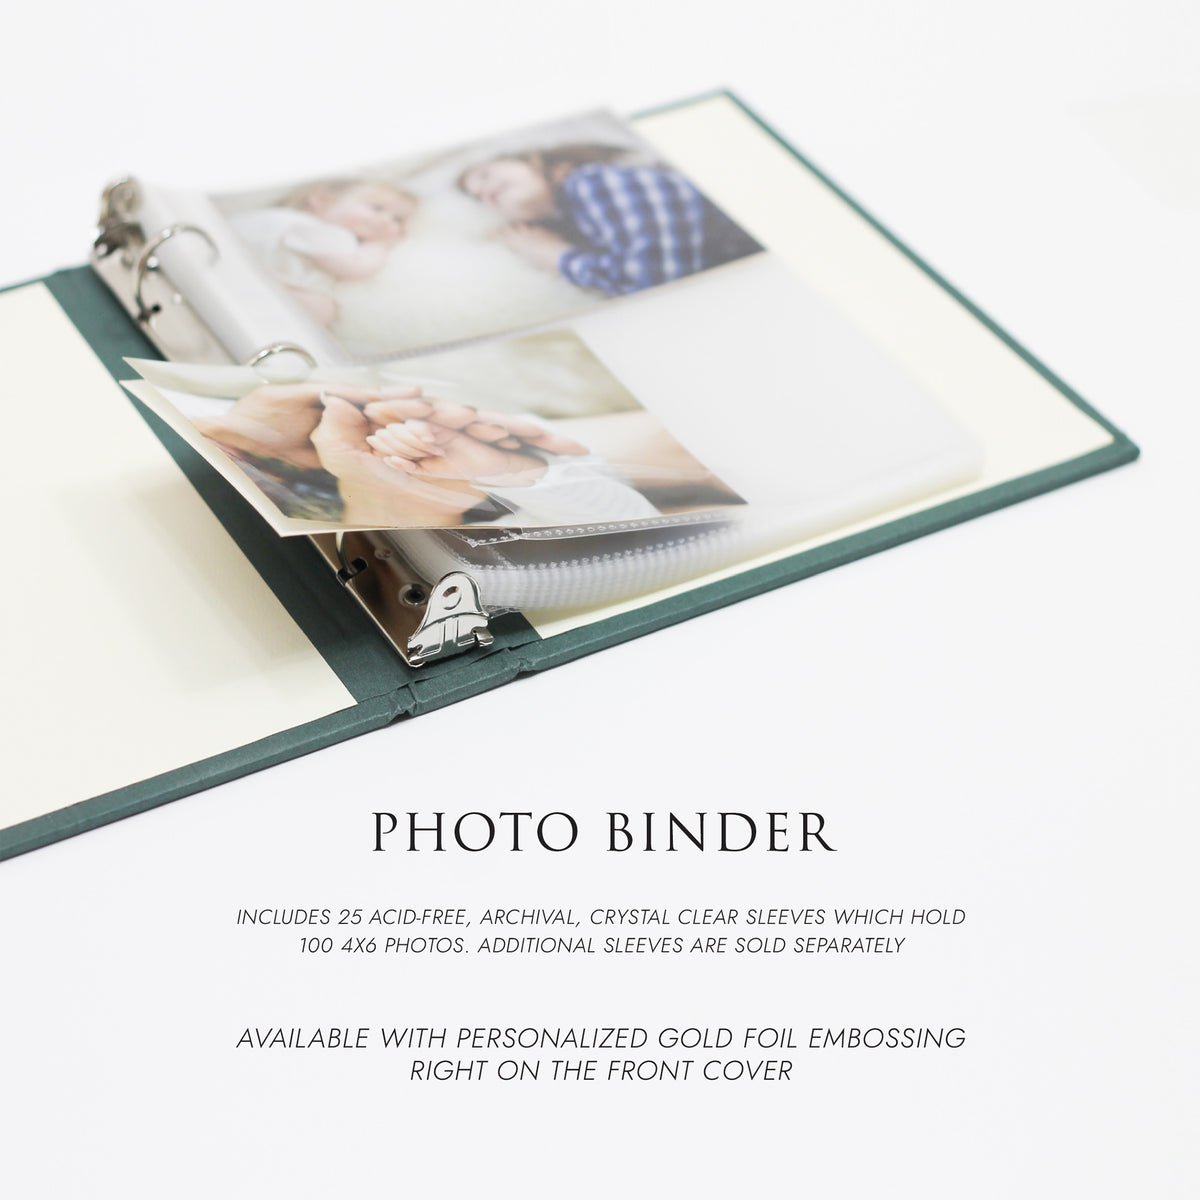 Medium Photo Binder For 4x6 Photos | Cover: Jade Silk | Available Personalized